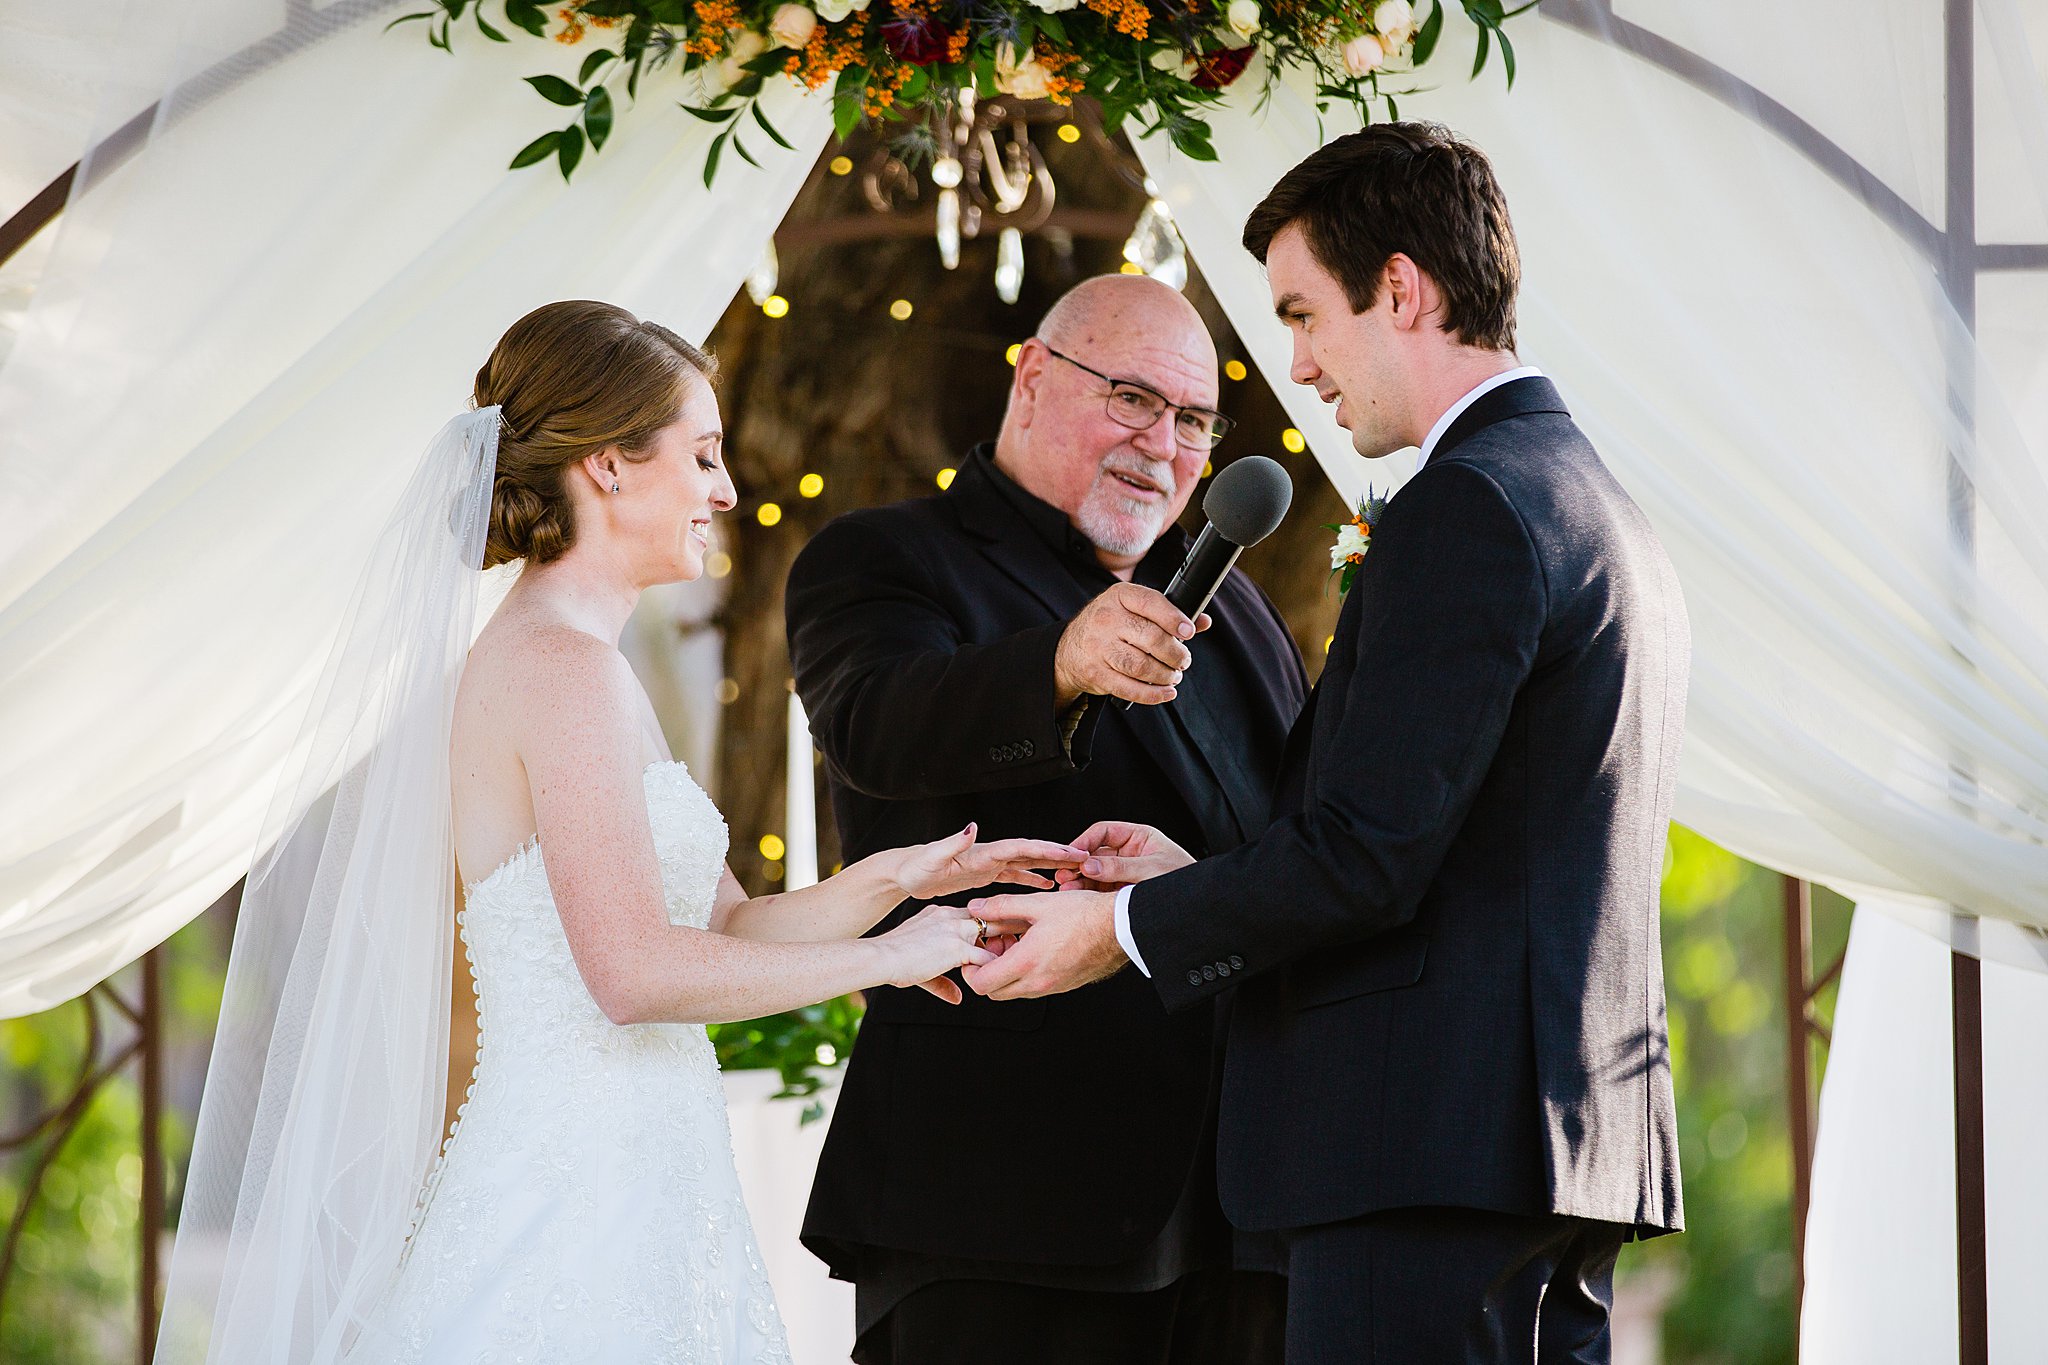 Bride and Groom exchange rings during their wedding ceremony at Secret Garden Events by Arizona wedding photographer PMA Photography.